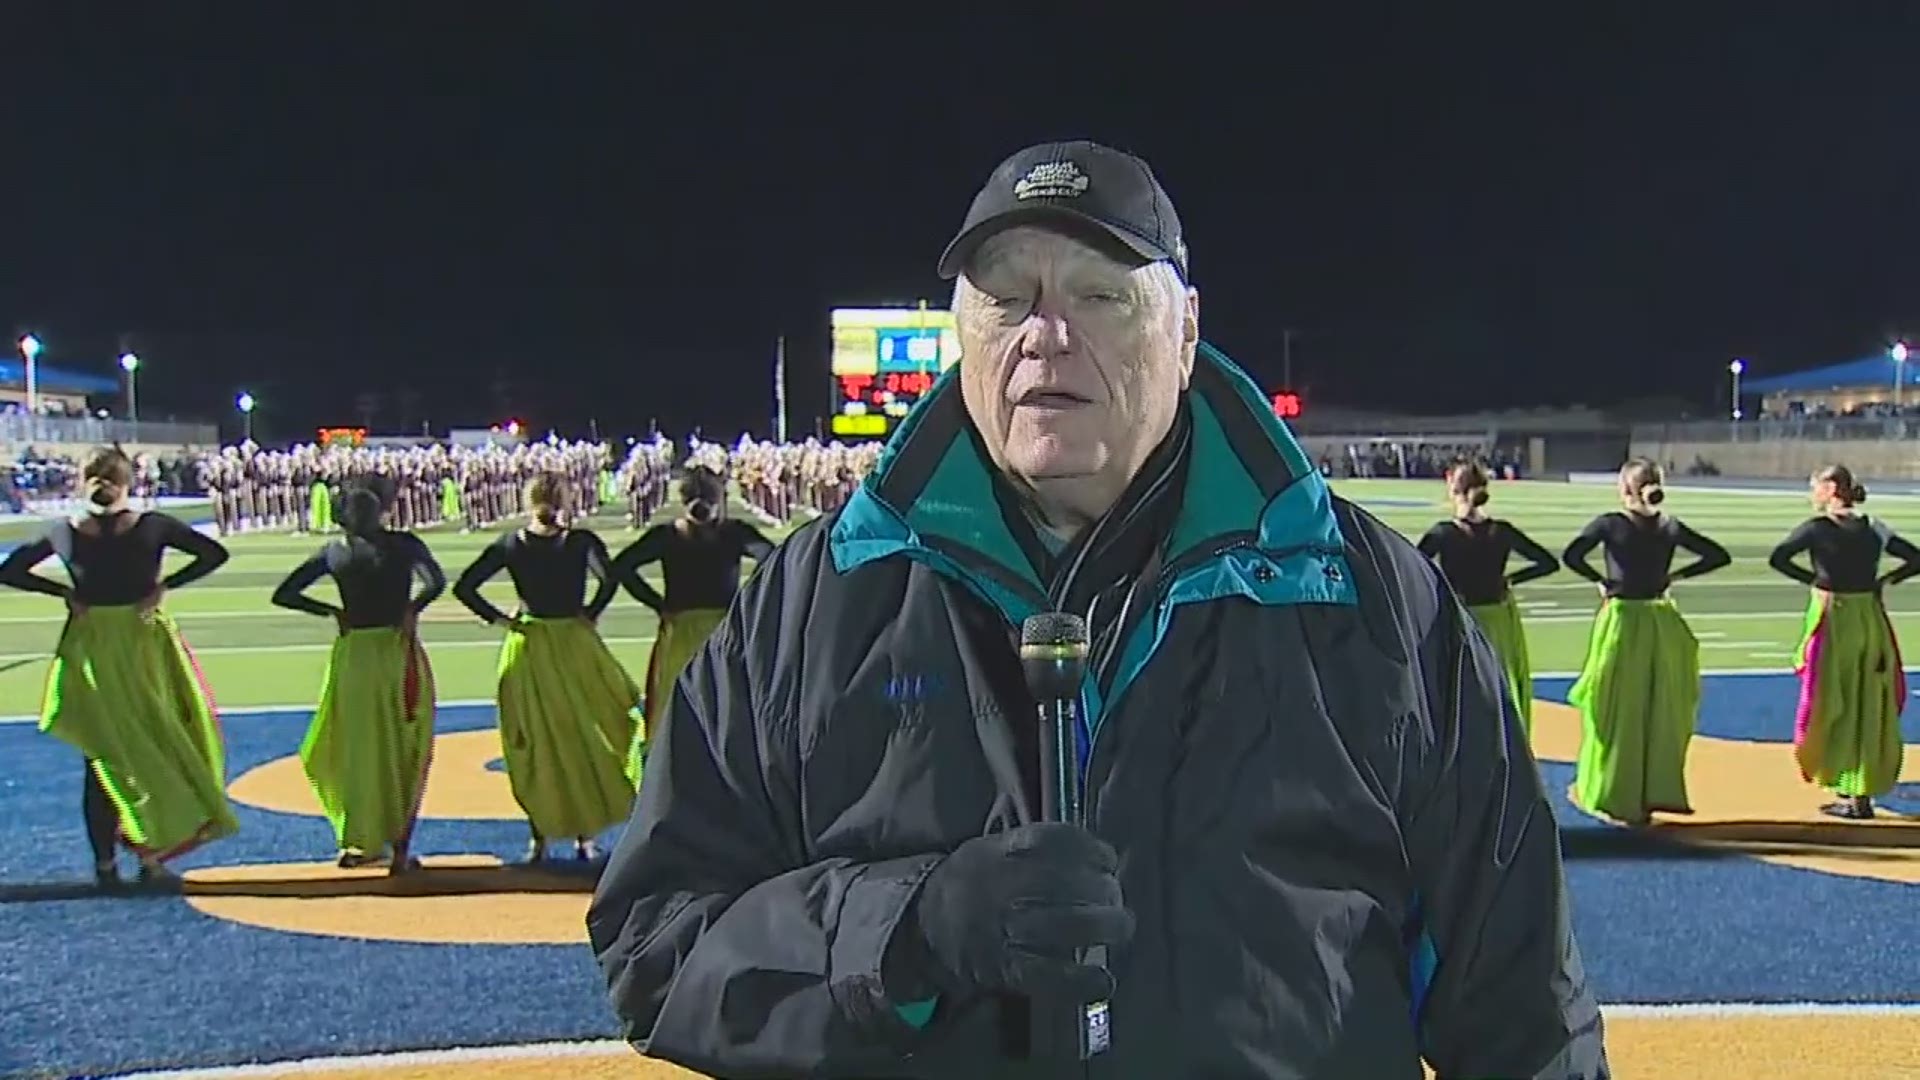 #GAMEOFTHEWEEK: It's Friday night and Dale Hansen is at our game of the week: Ennis vs. Corsicana.